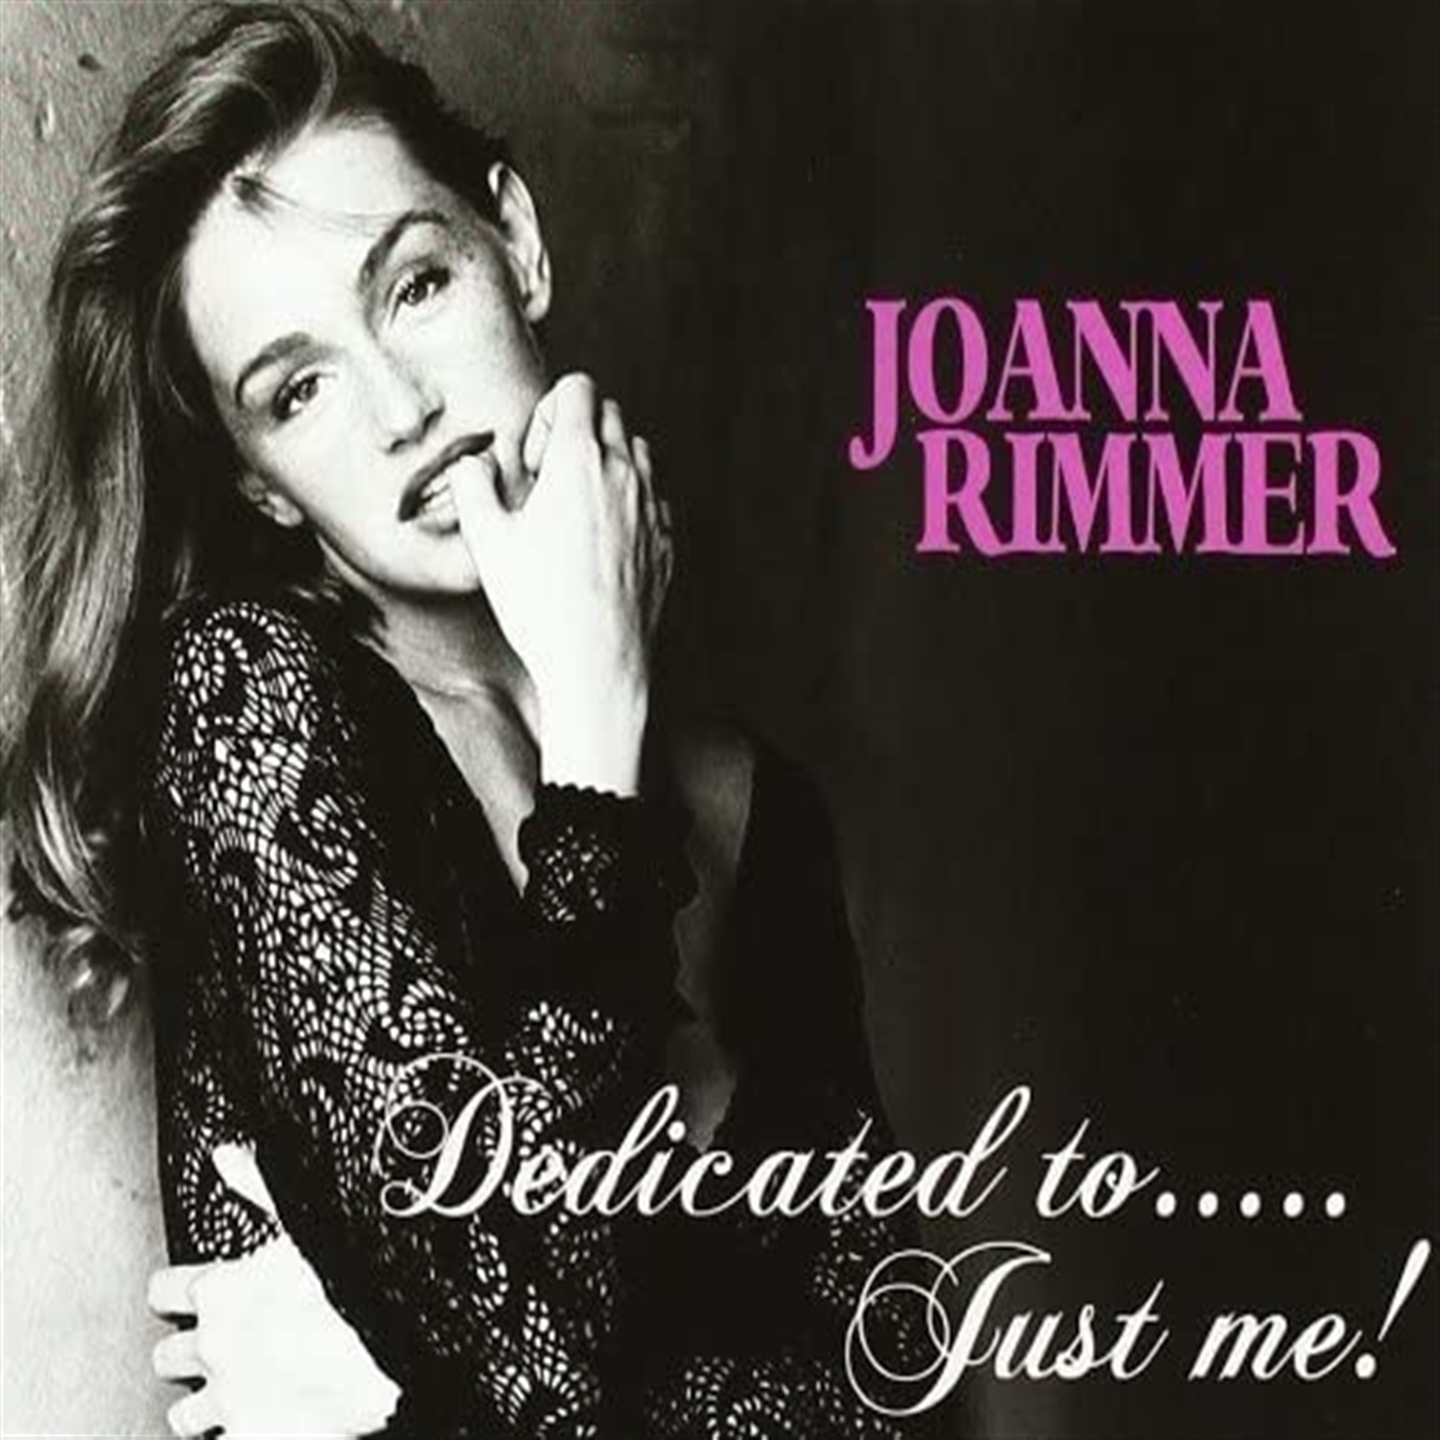 Joanna Rimmer - Dedicated To... Just Me! - Picture 1 of 1